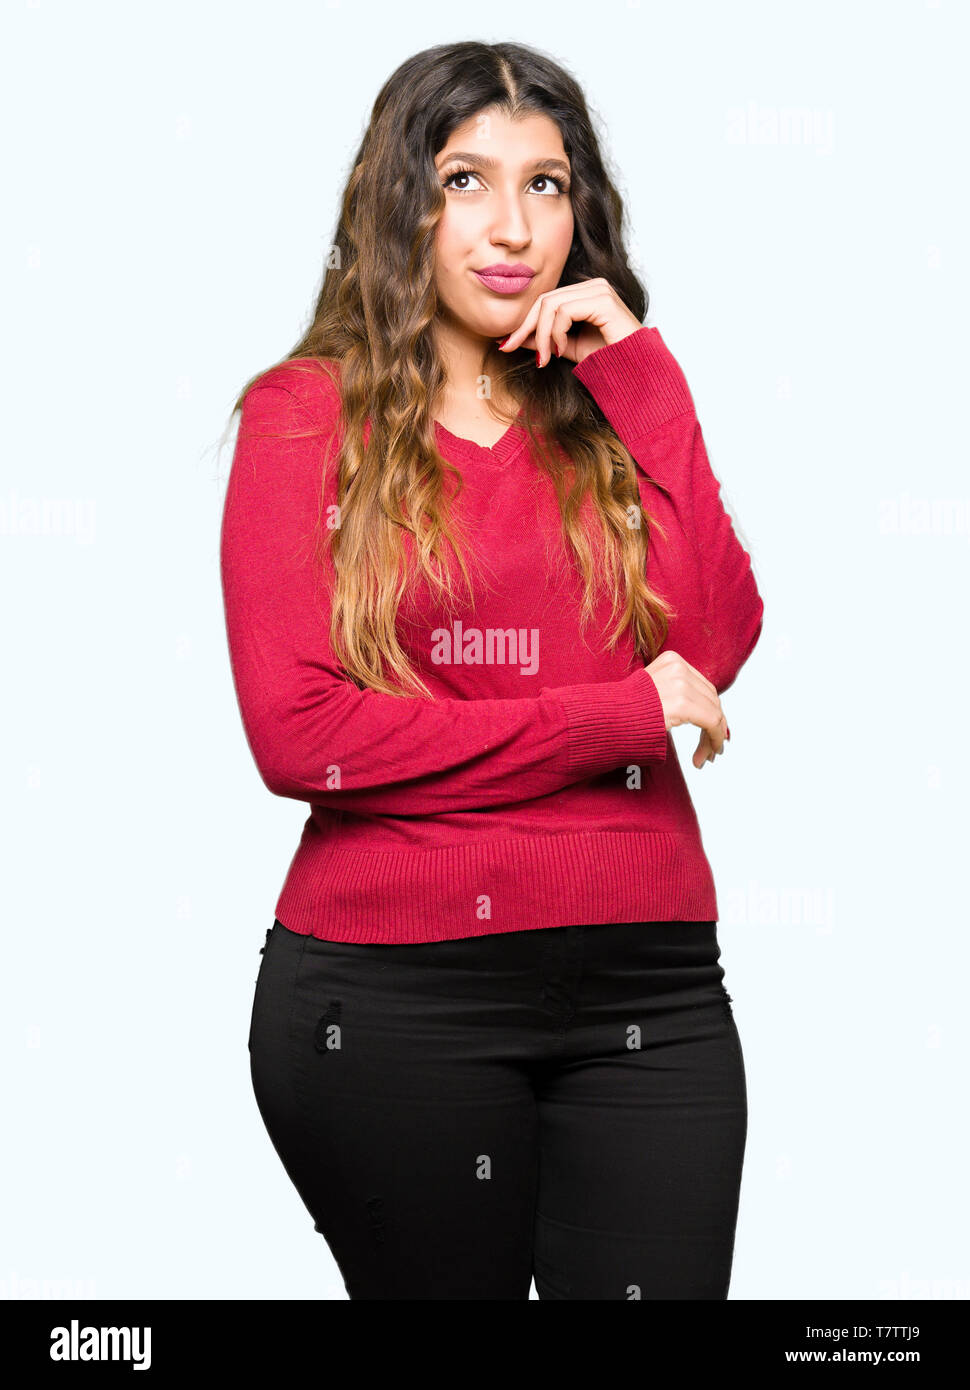 Young beautiful woman wearing red sweater with hand on chin thinking about question, pensive expression. Smiling with thoughtful face. Doubt concept. Stock Photo